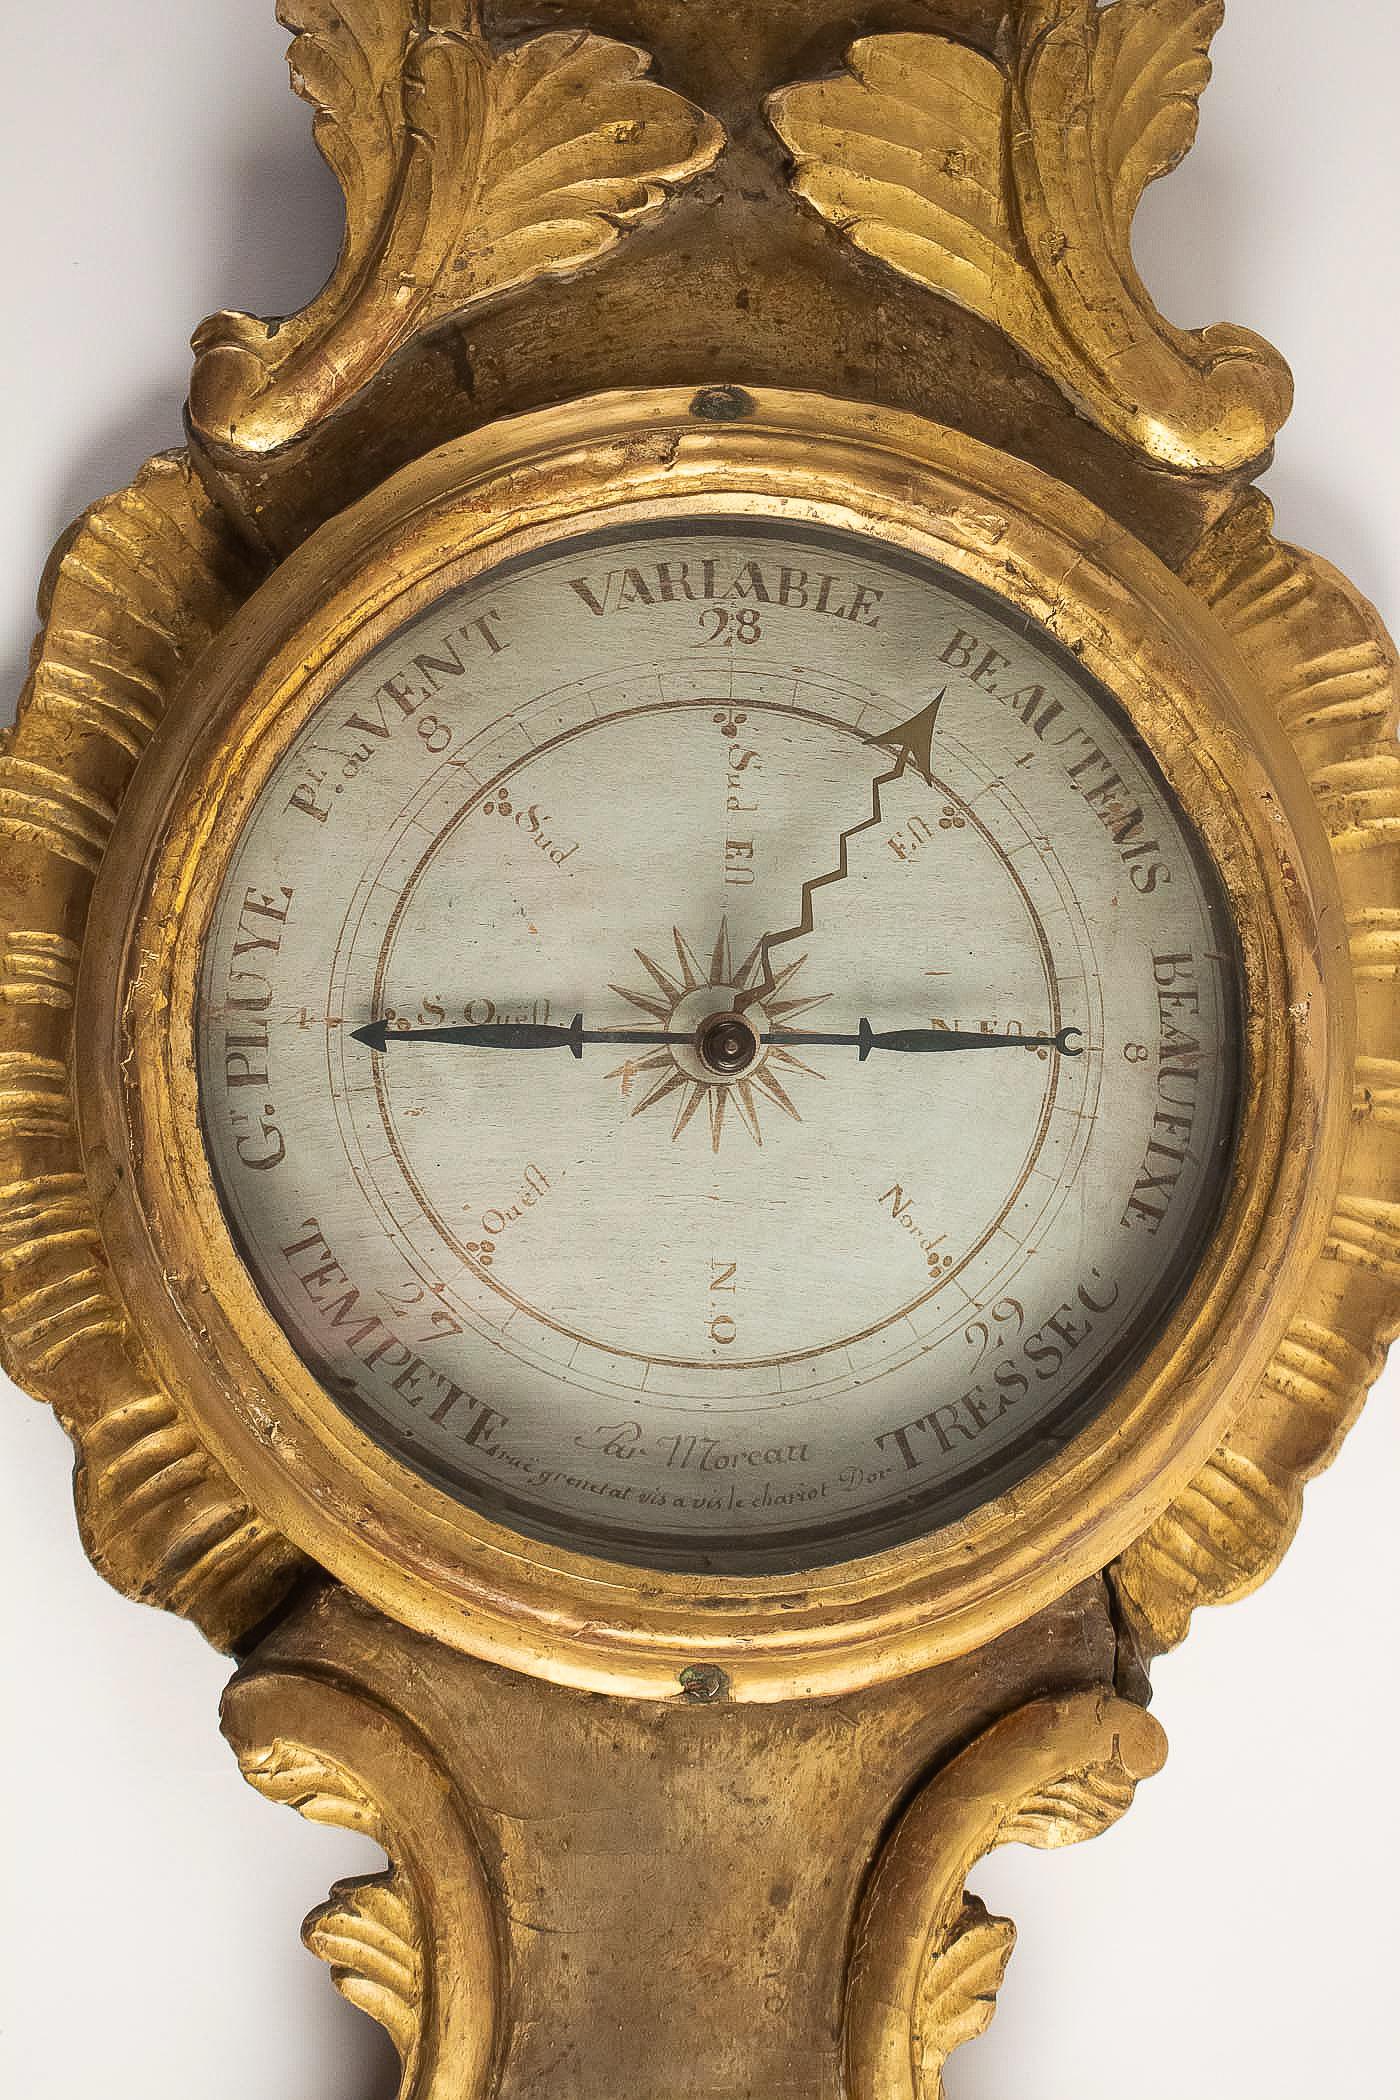 By Moreau, French Louis XV Period Decorative Barometer-Thermometer, circa 1770 1